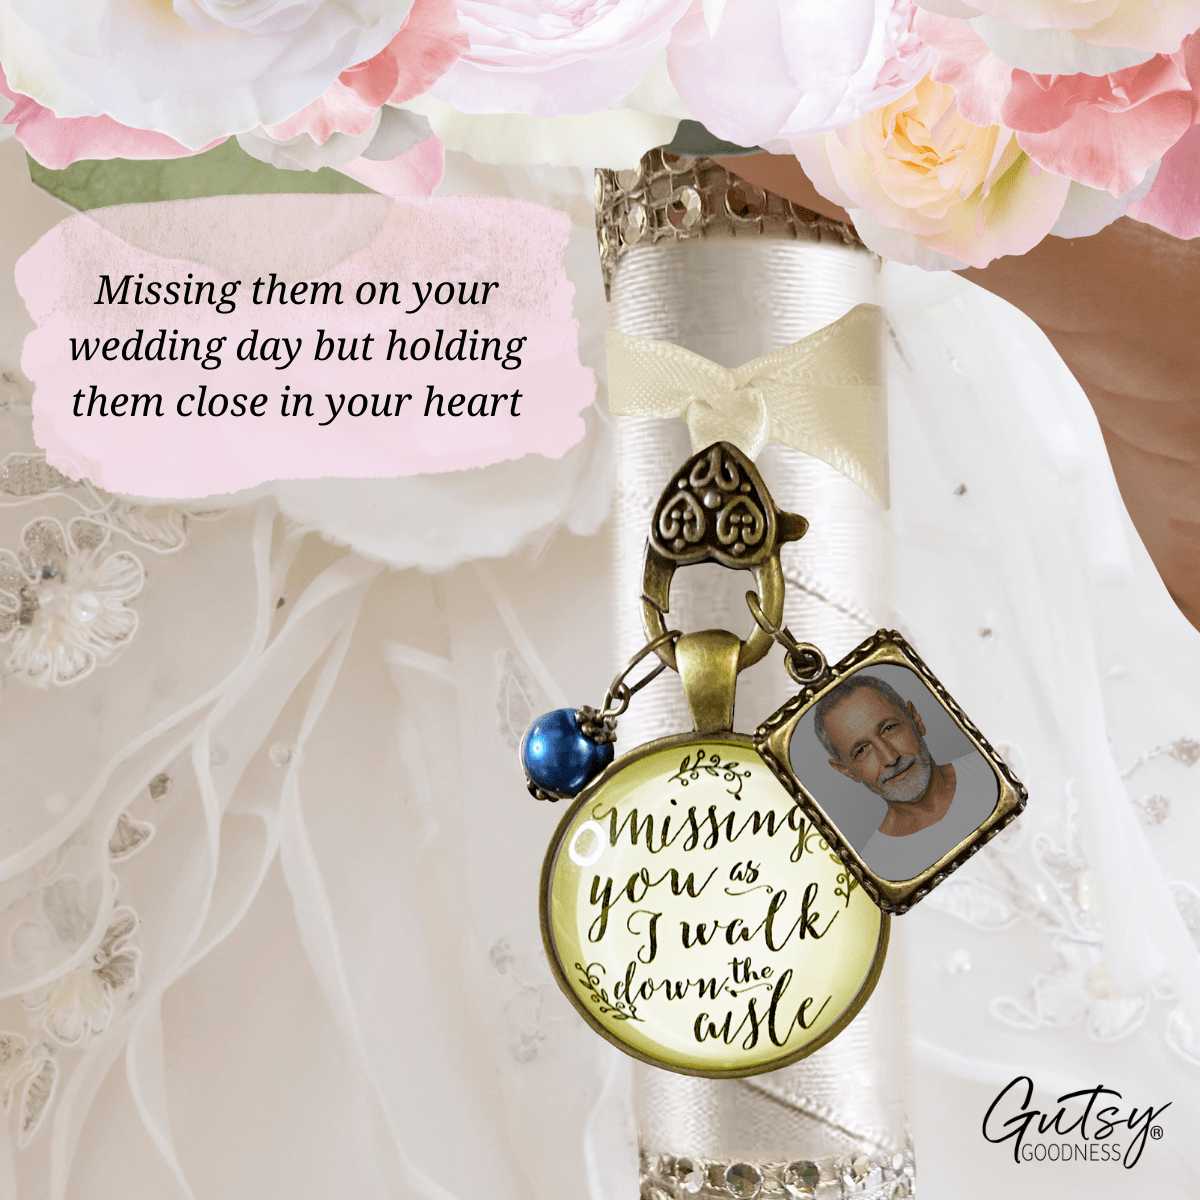 Missing You As I Walk Down The Aisle Wedding Bouquet Memory Memorial Blue Bead Frame - Gutsy Goodness Handmade Jewelry Gifts